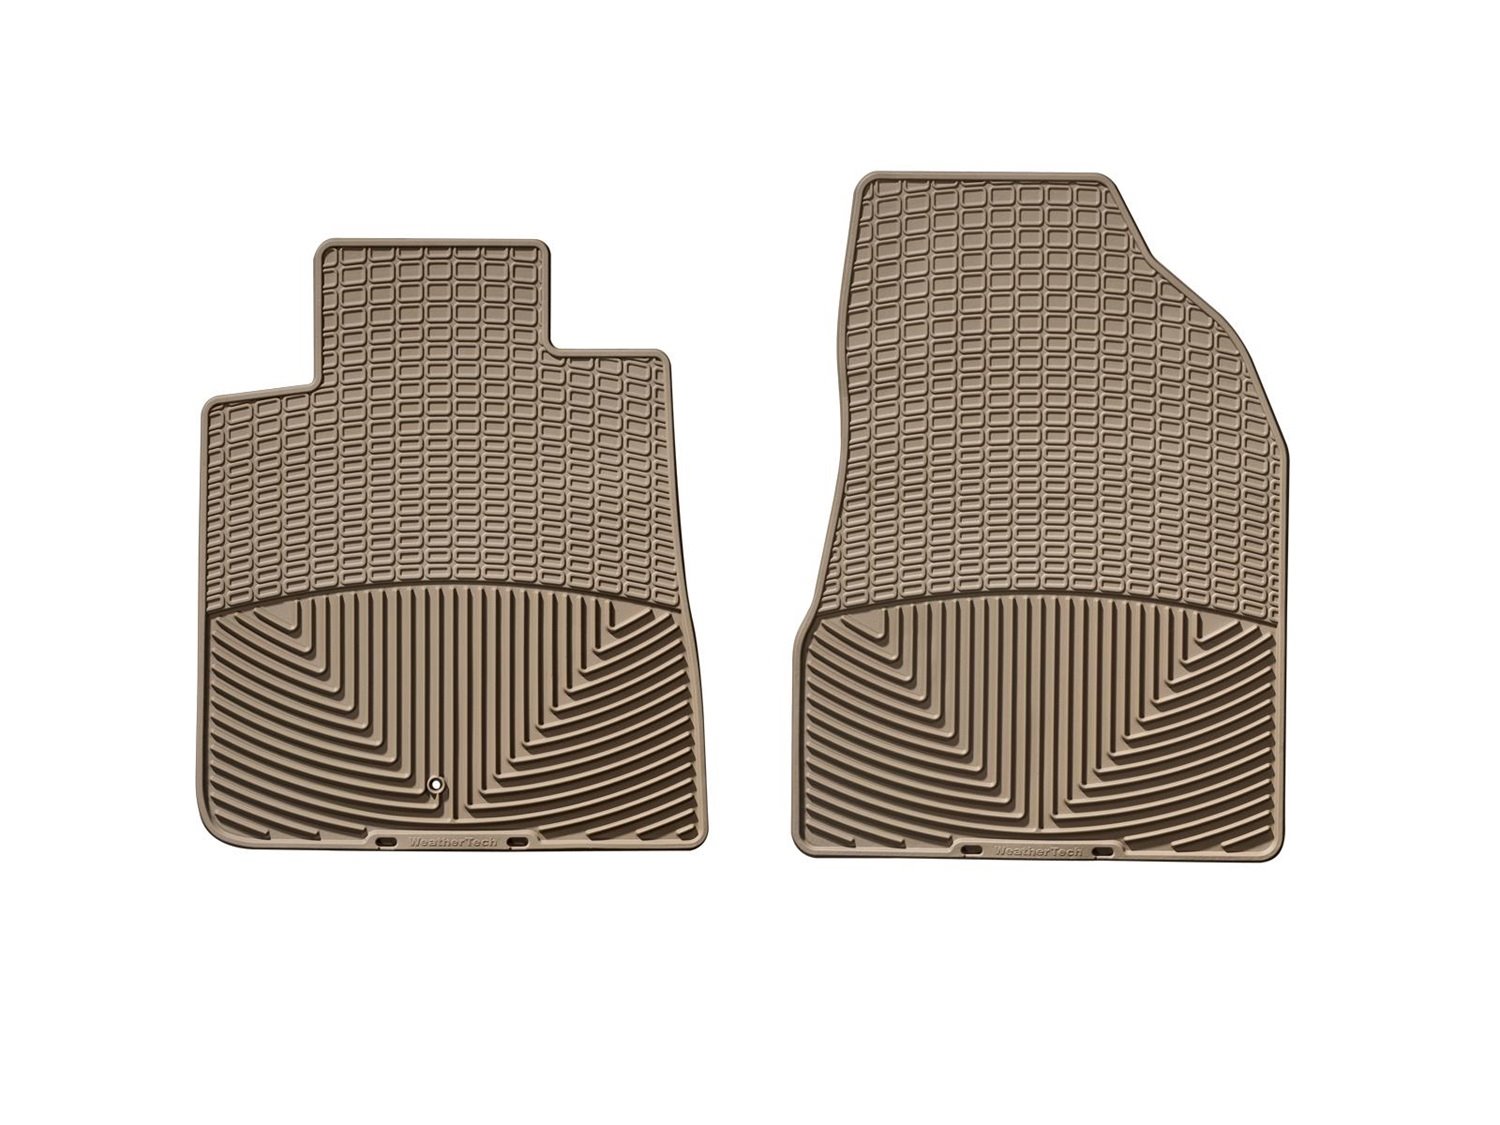 All-Weather Floor Mats 2007-2017 Buick Enclave, Chevy Traverse, GMC Acadia, Saturn Outlook